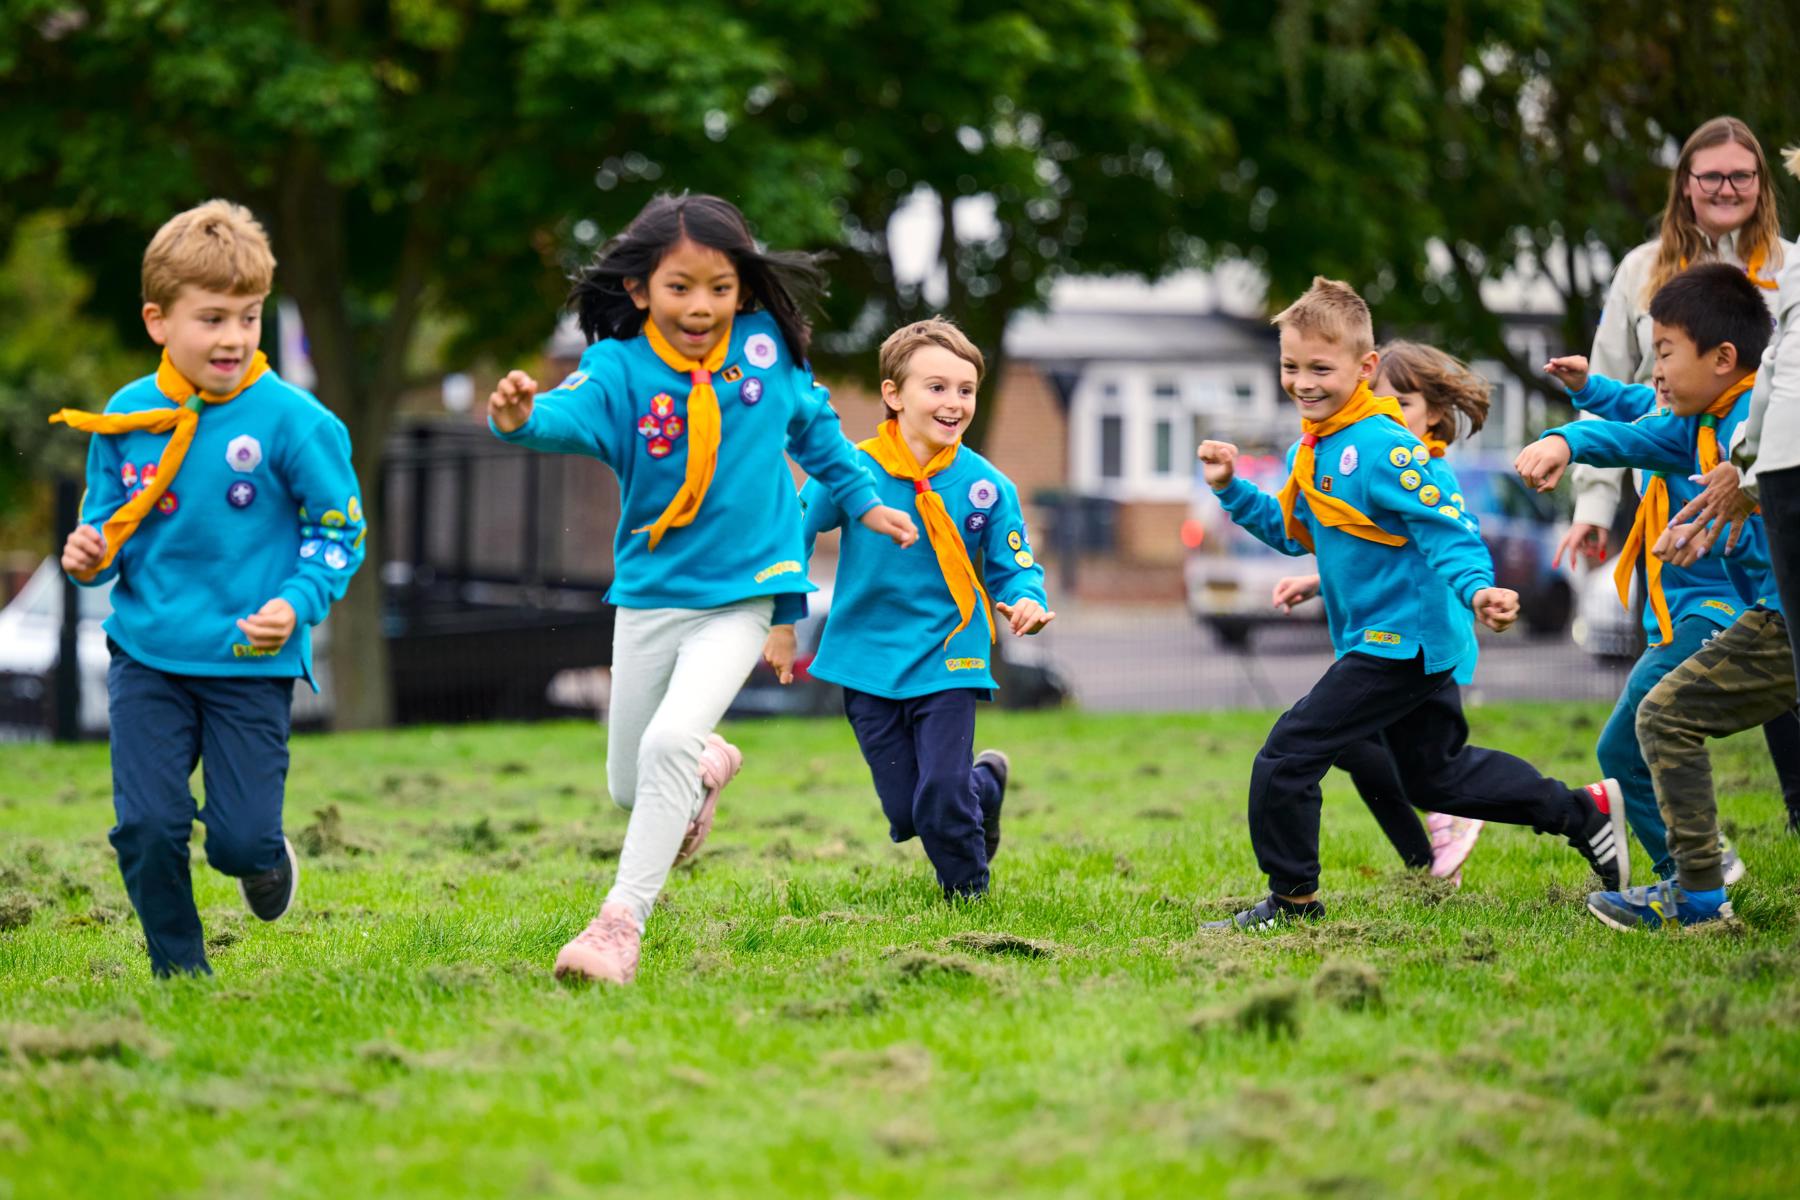 A group of Beavers wearing blue jumpers and yellow neckers are running around on a field playing a game